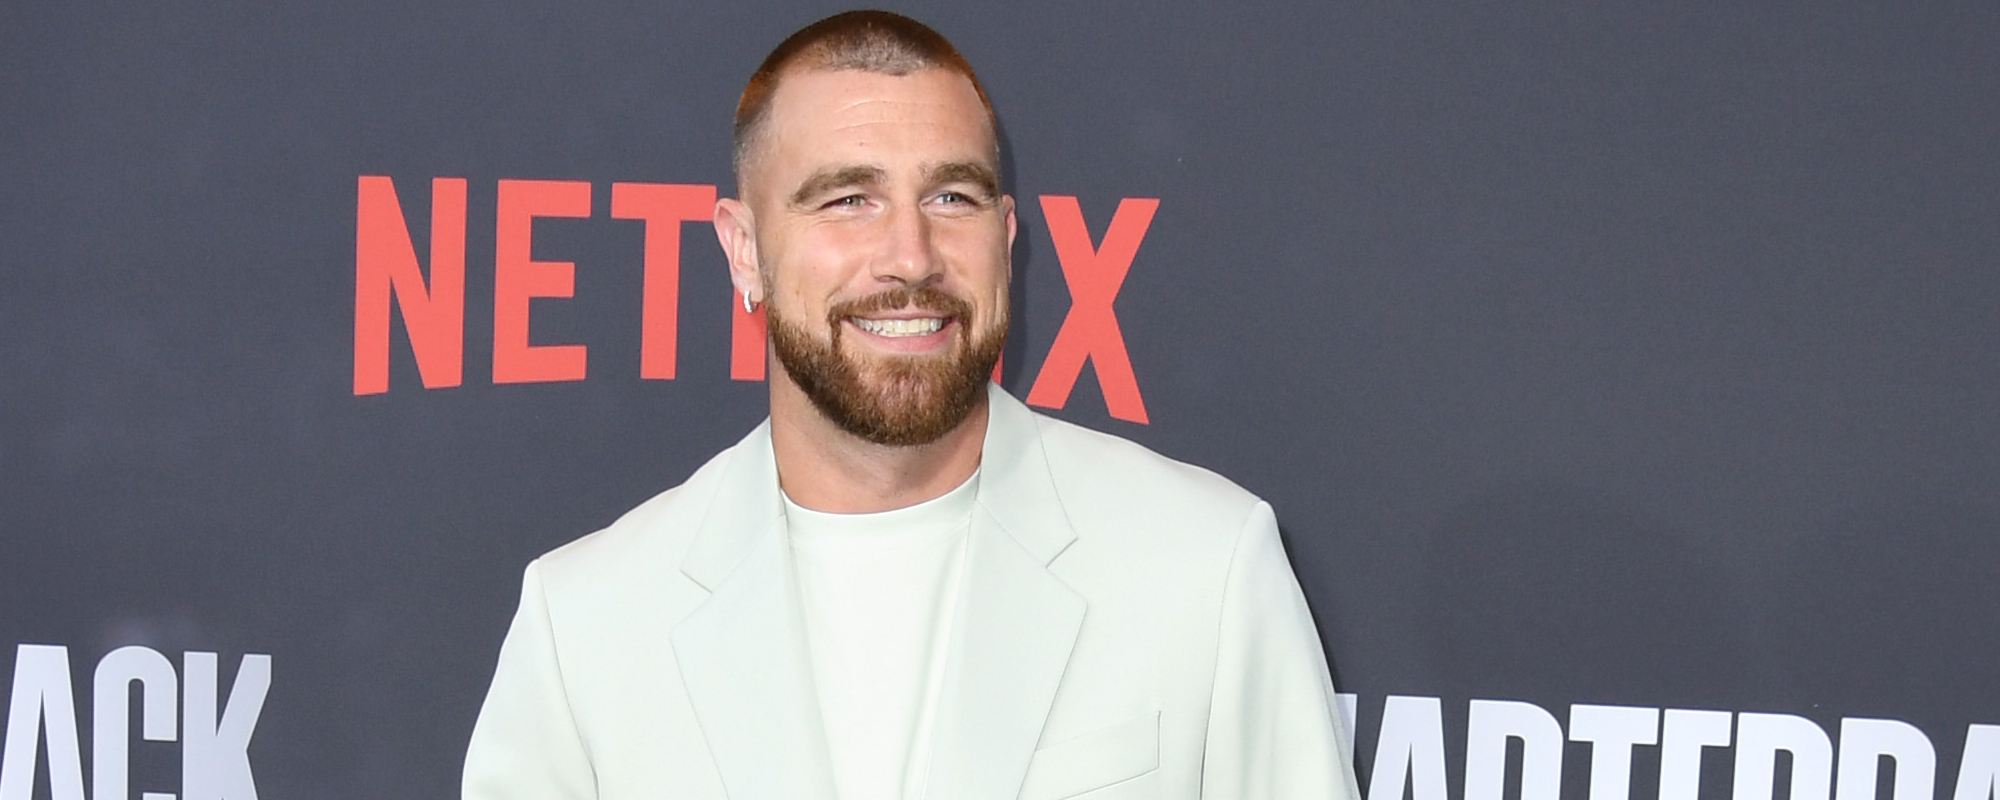 Travis Kelce Congratulates Taylor Swift on Making It To The Super Bowl During Her ”Rookie Year”